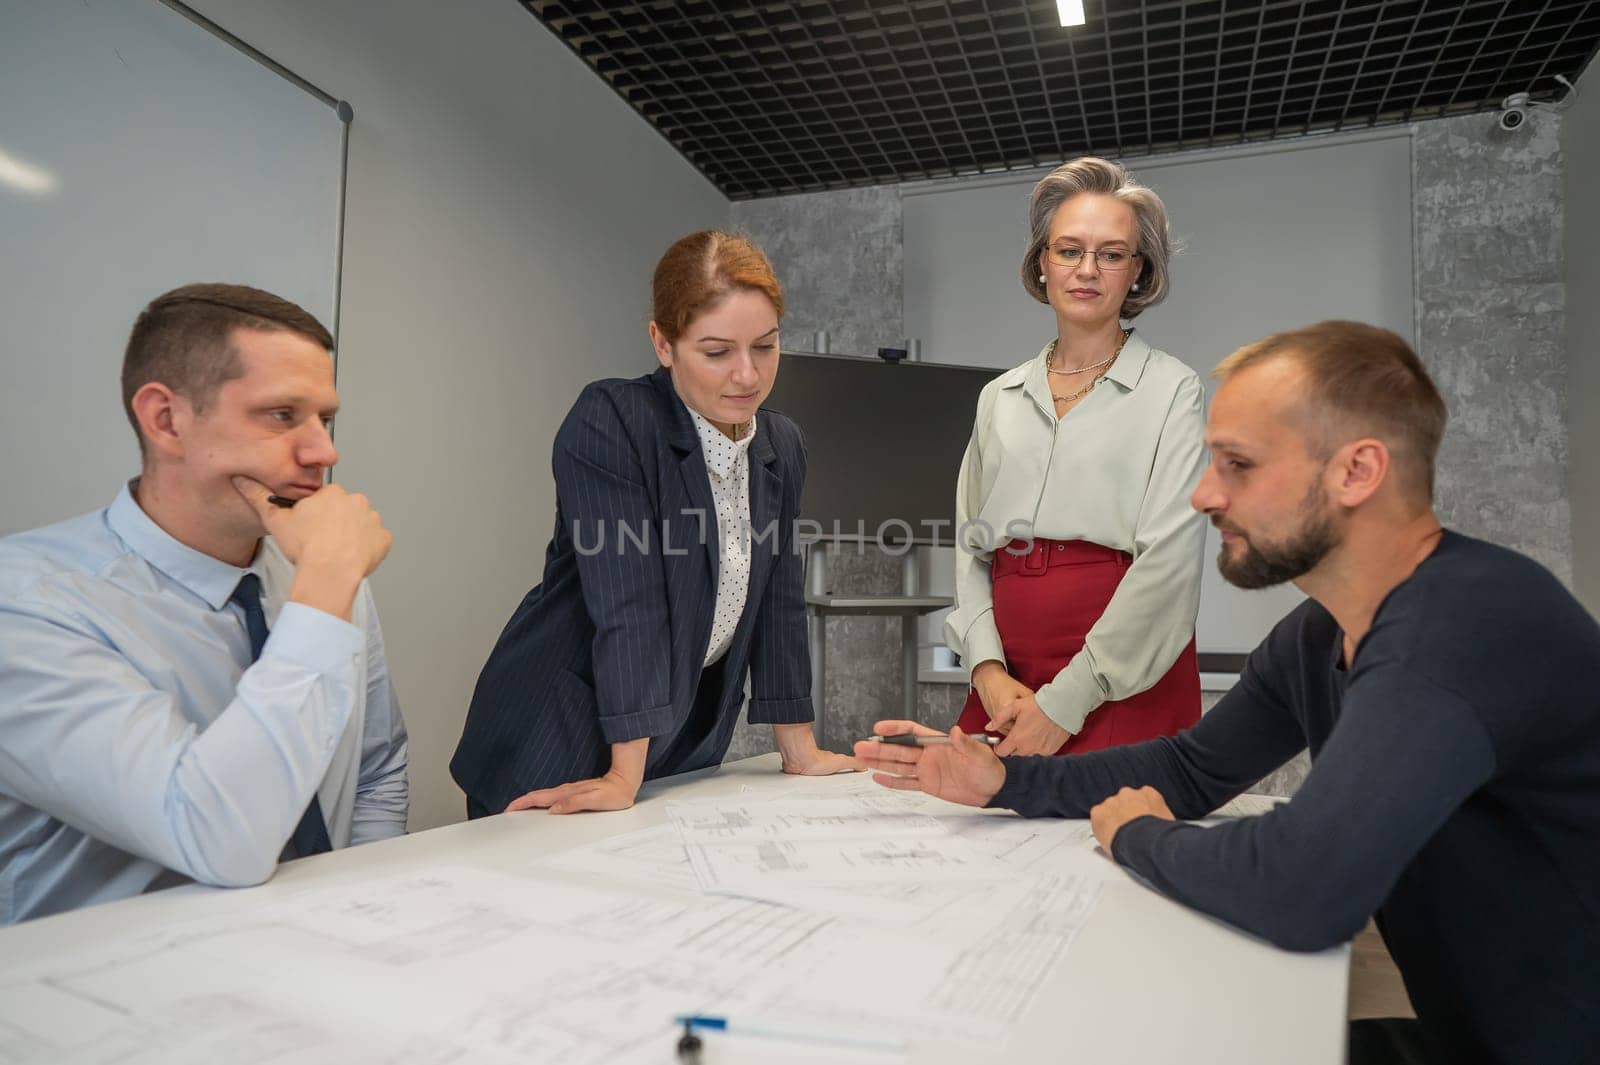 Four business people sitting around a table discussing blueprints. Designers engineers at a meeting